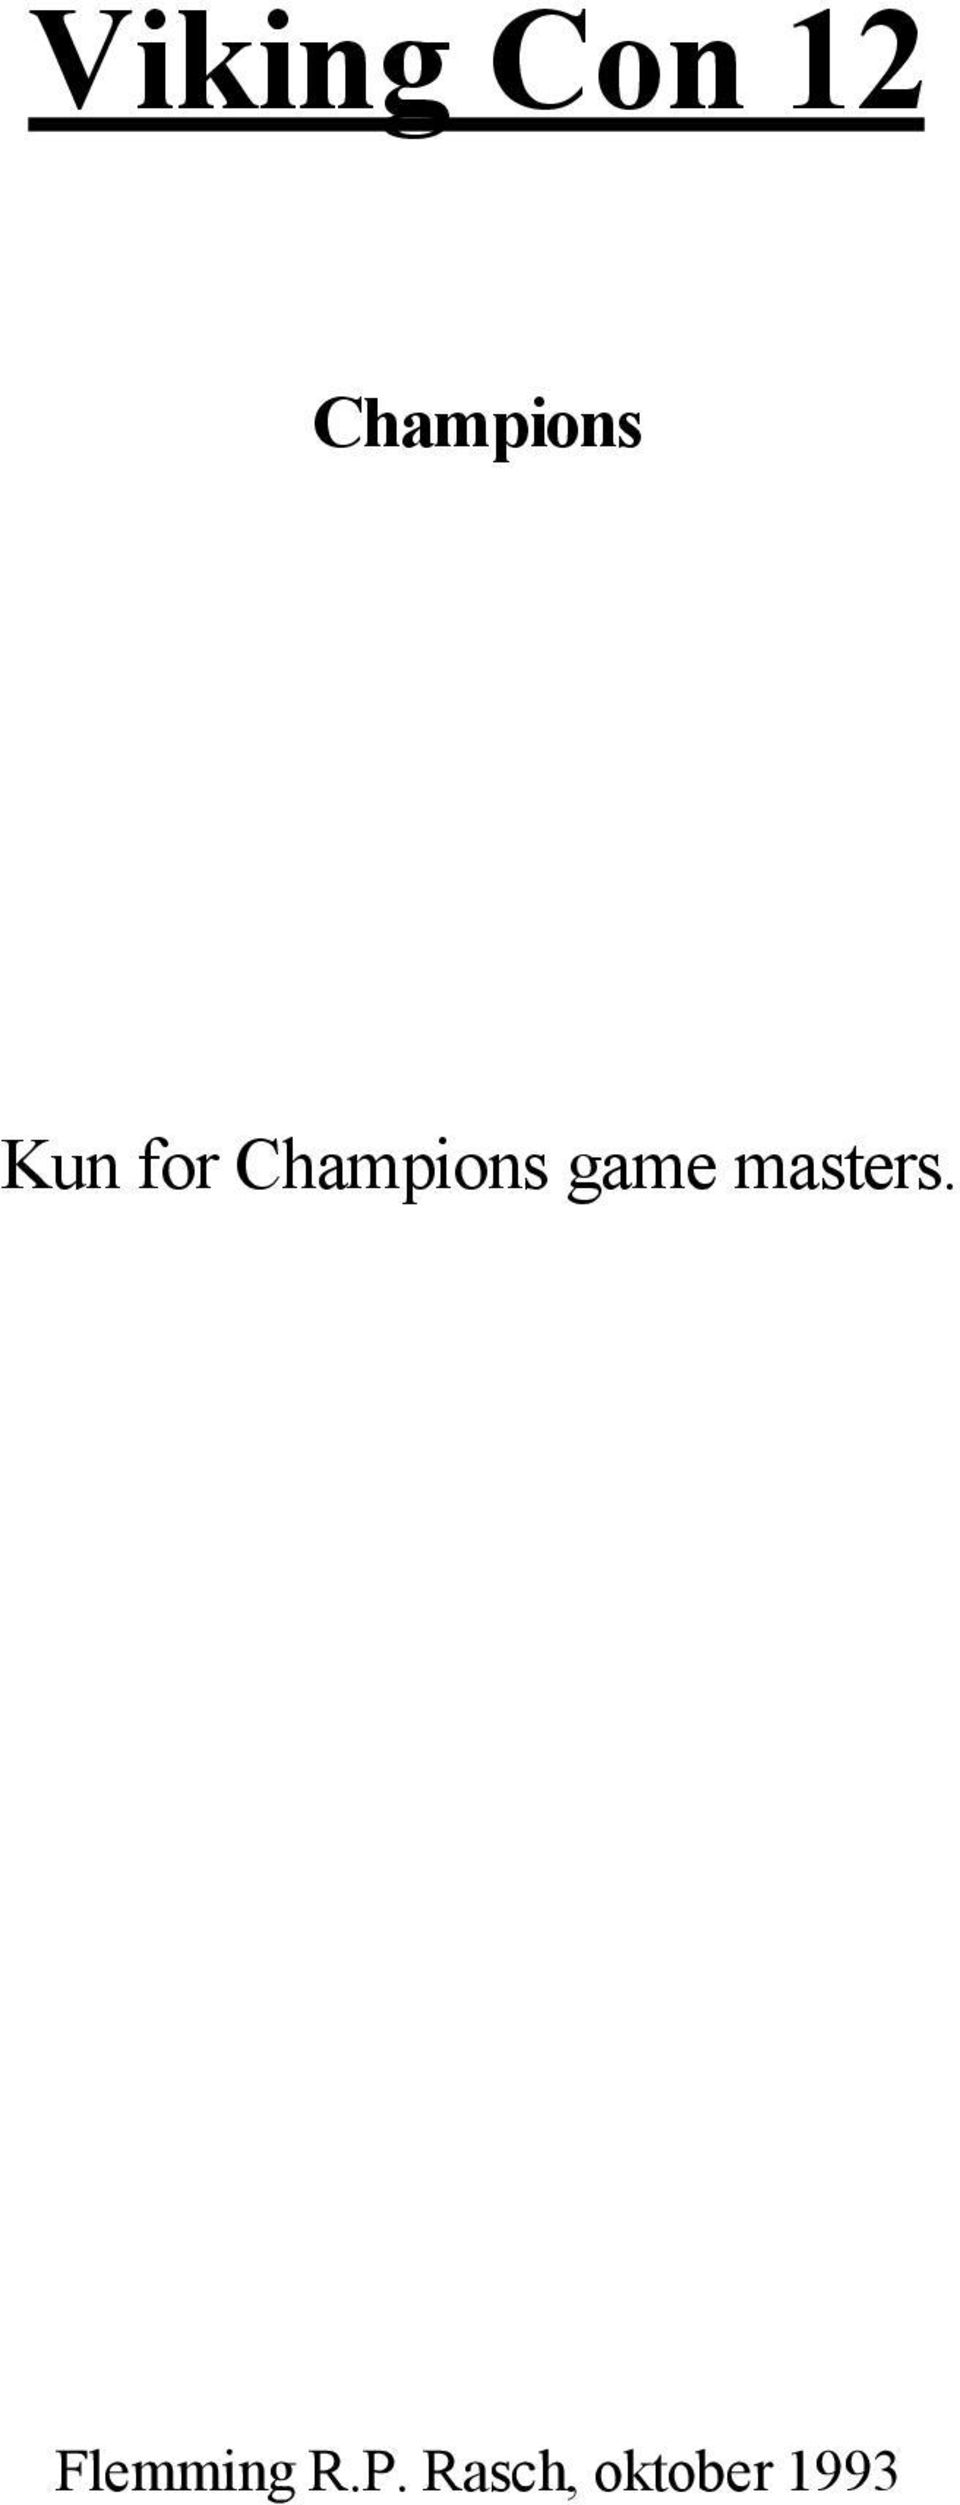 Champions game masters.